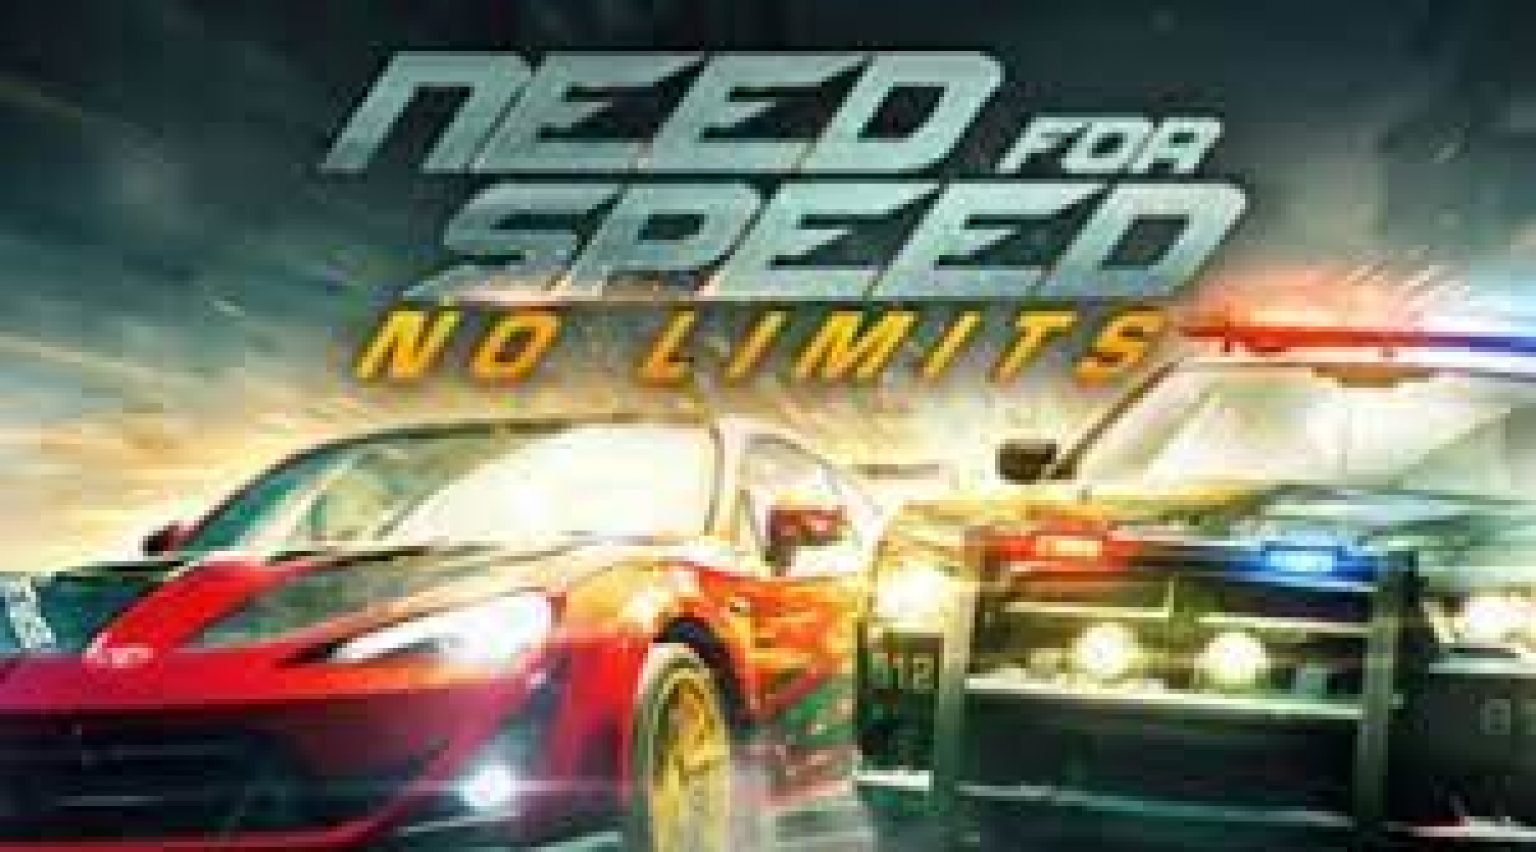 Need for speed underground full game free download for pc